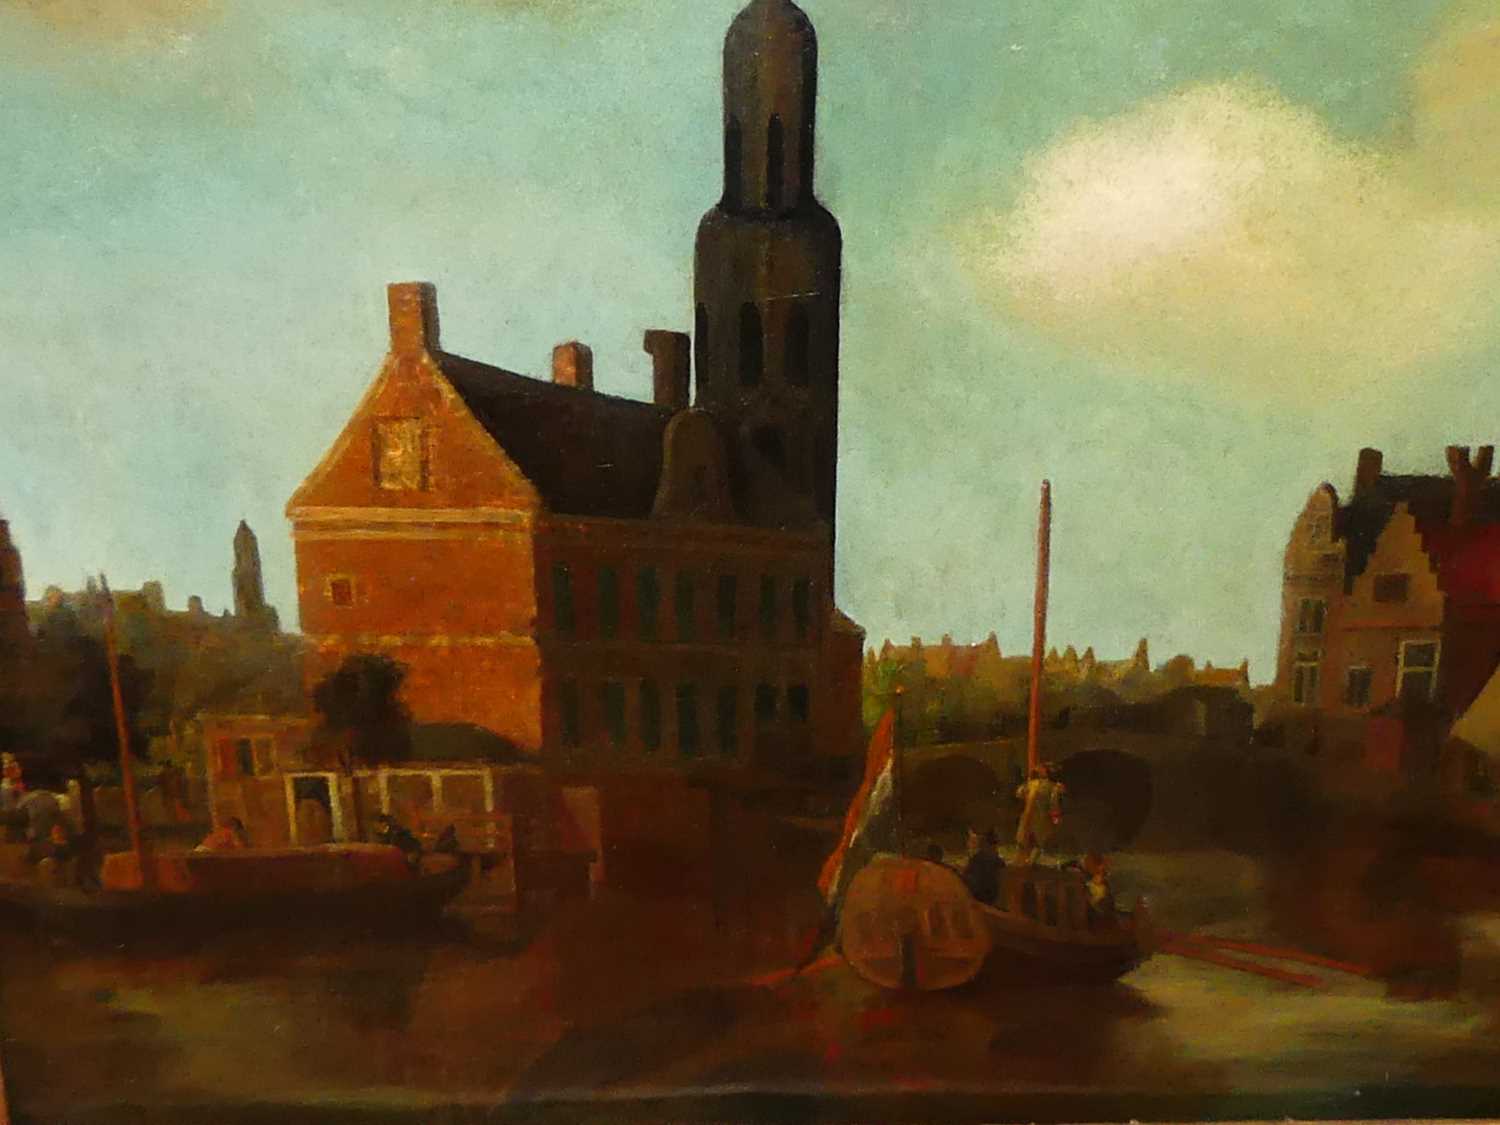 After Abraham Jansz Storck (1644-1708) - Barges on a Dutch canal, oil on canvas, 46x60cm - Image 3 of 9